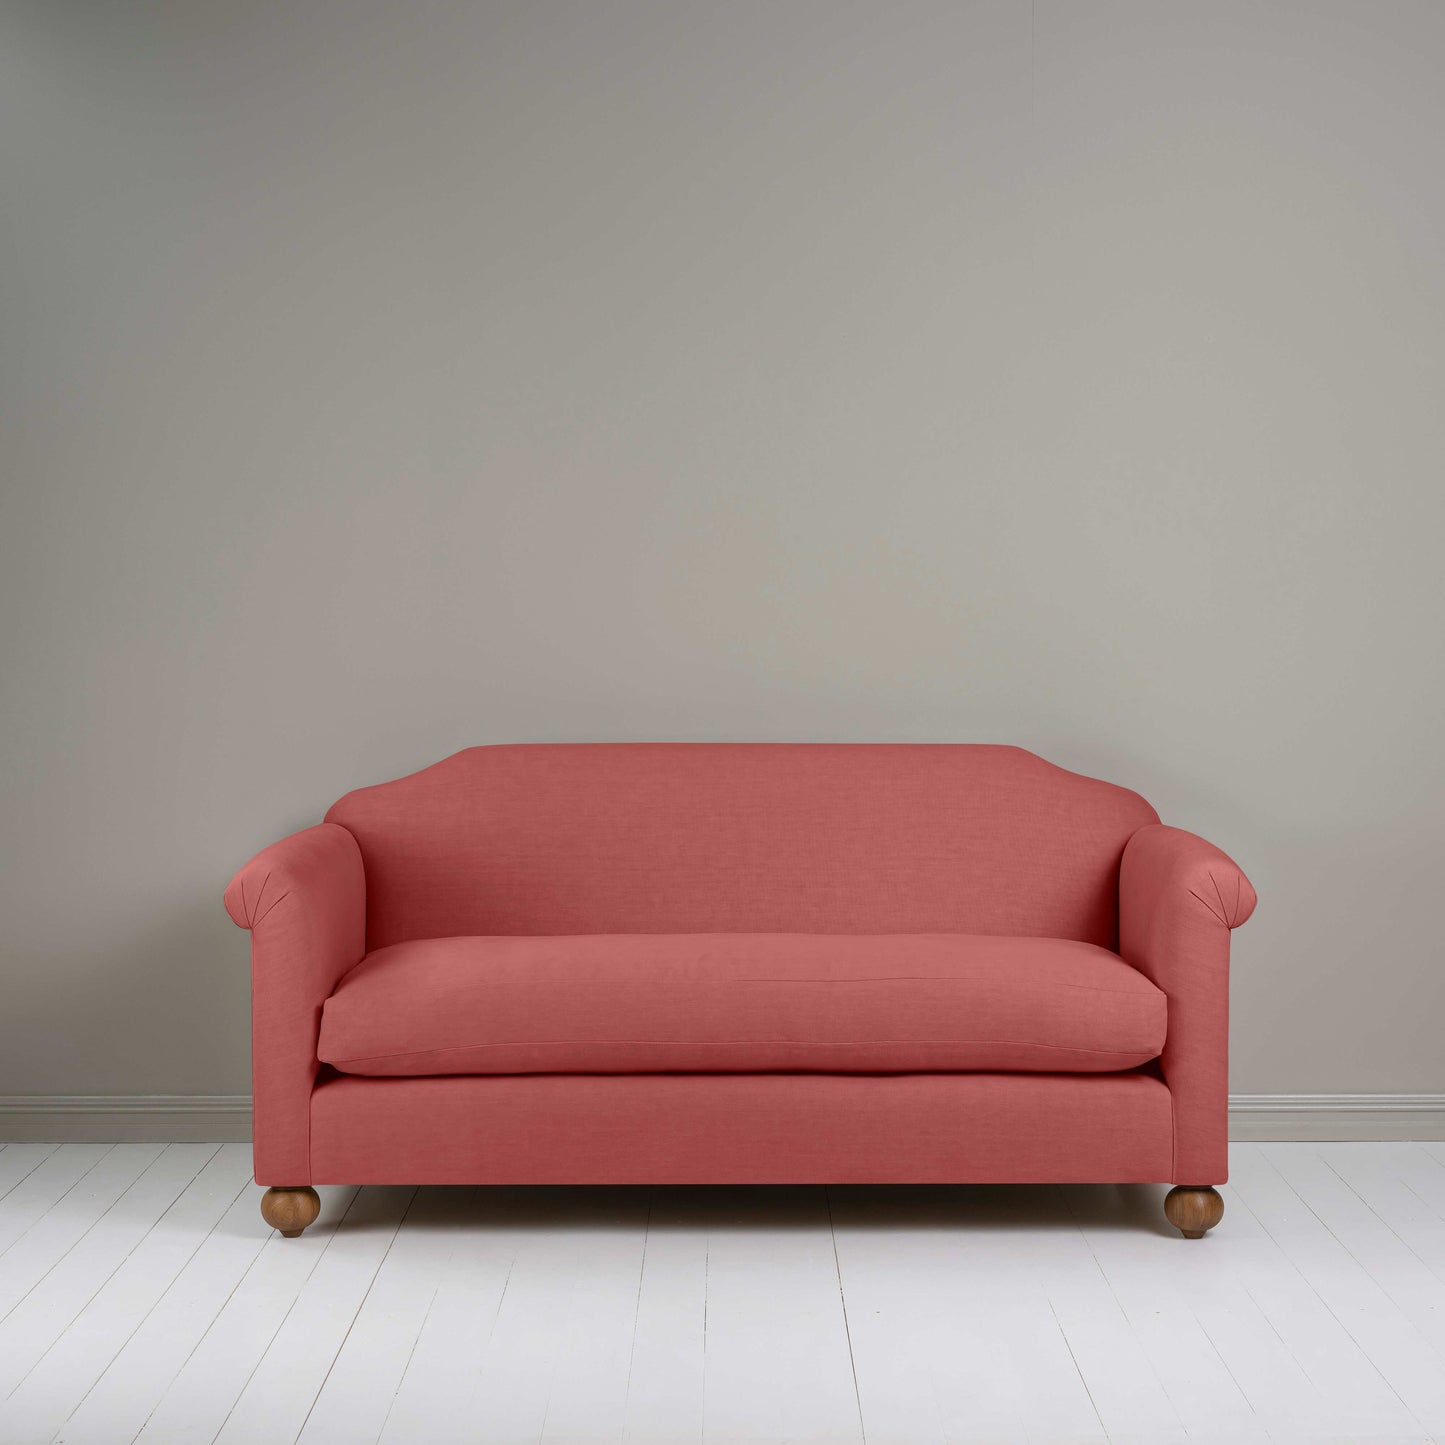 Dolittle 3 Seater Sofa in Laidback Linen Rouge